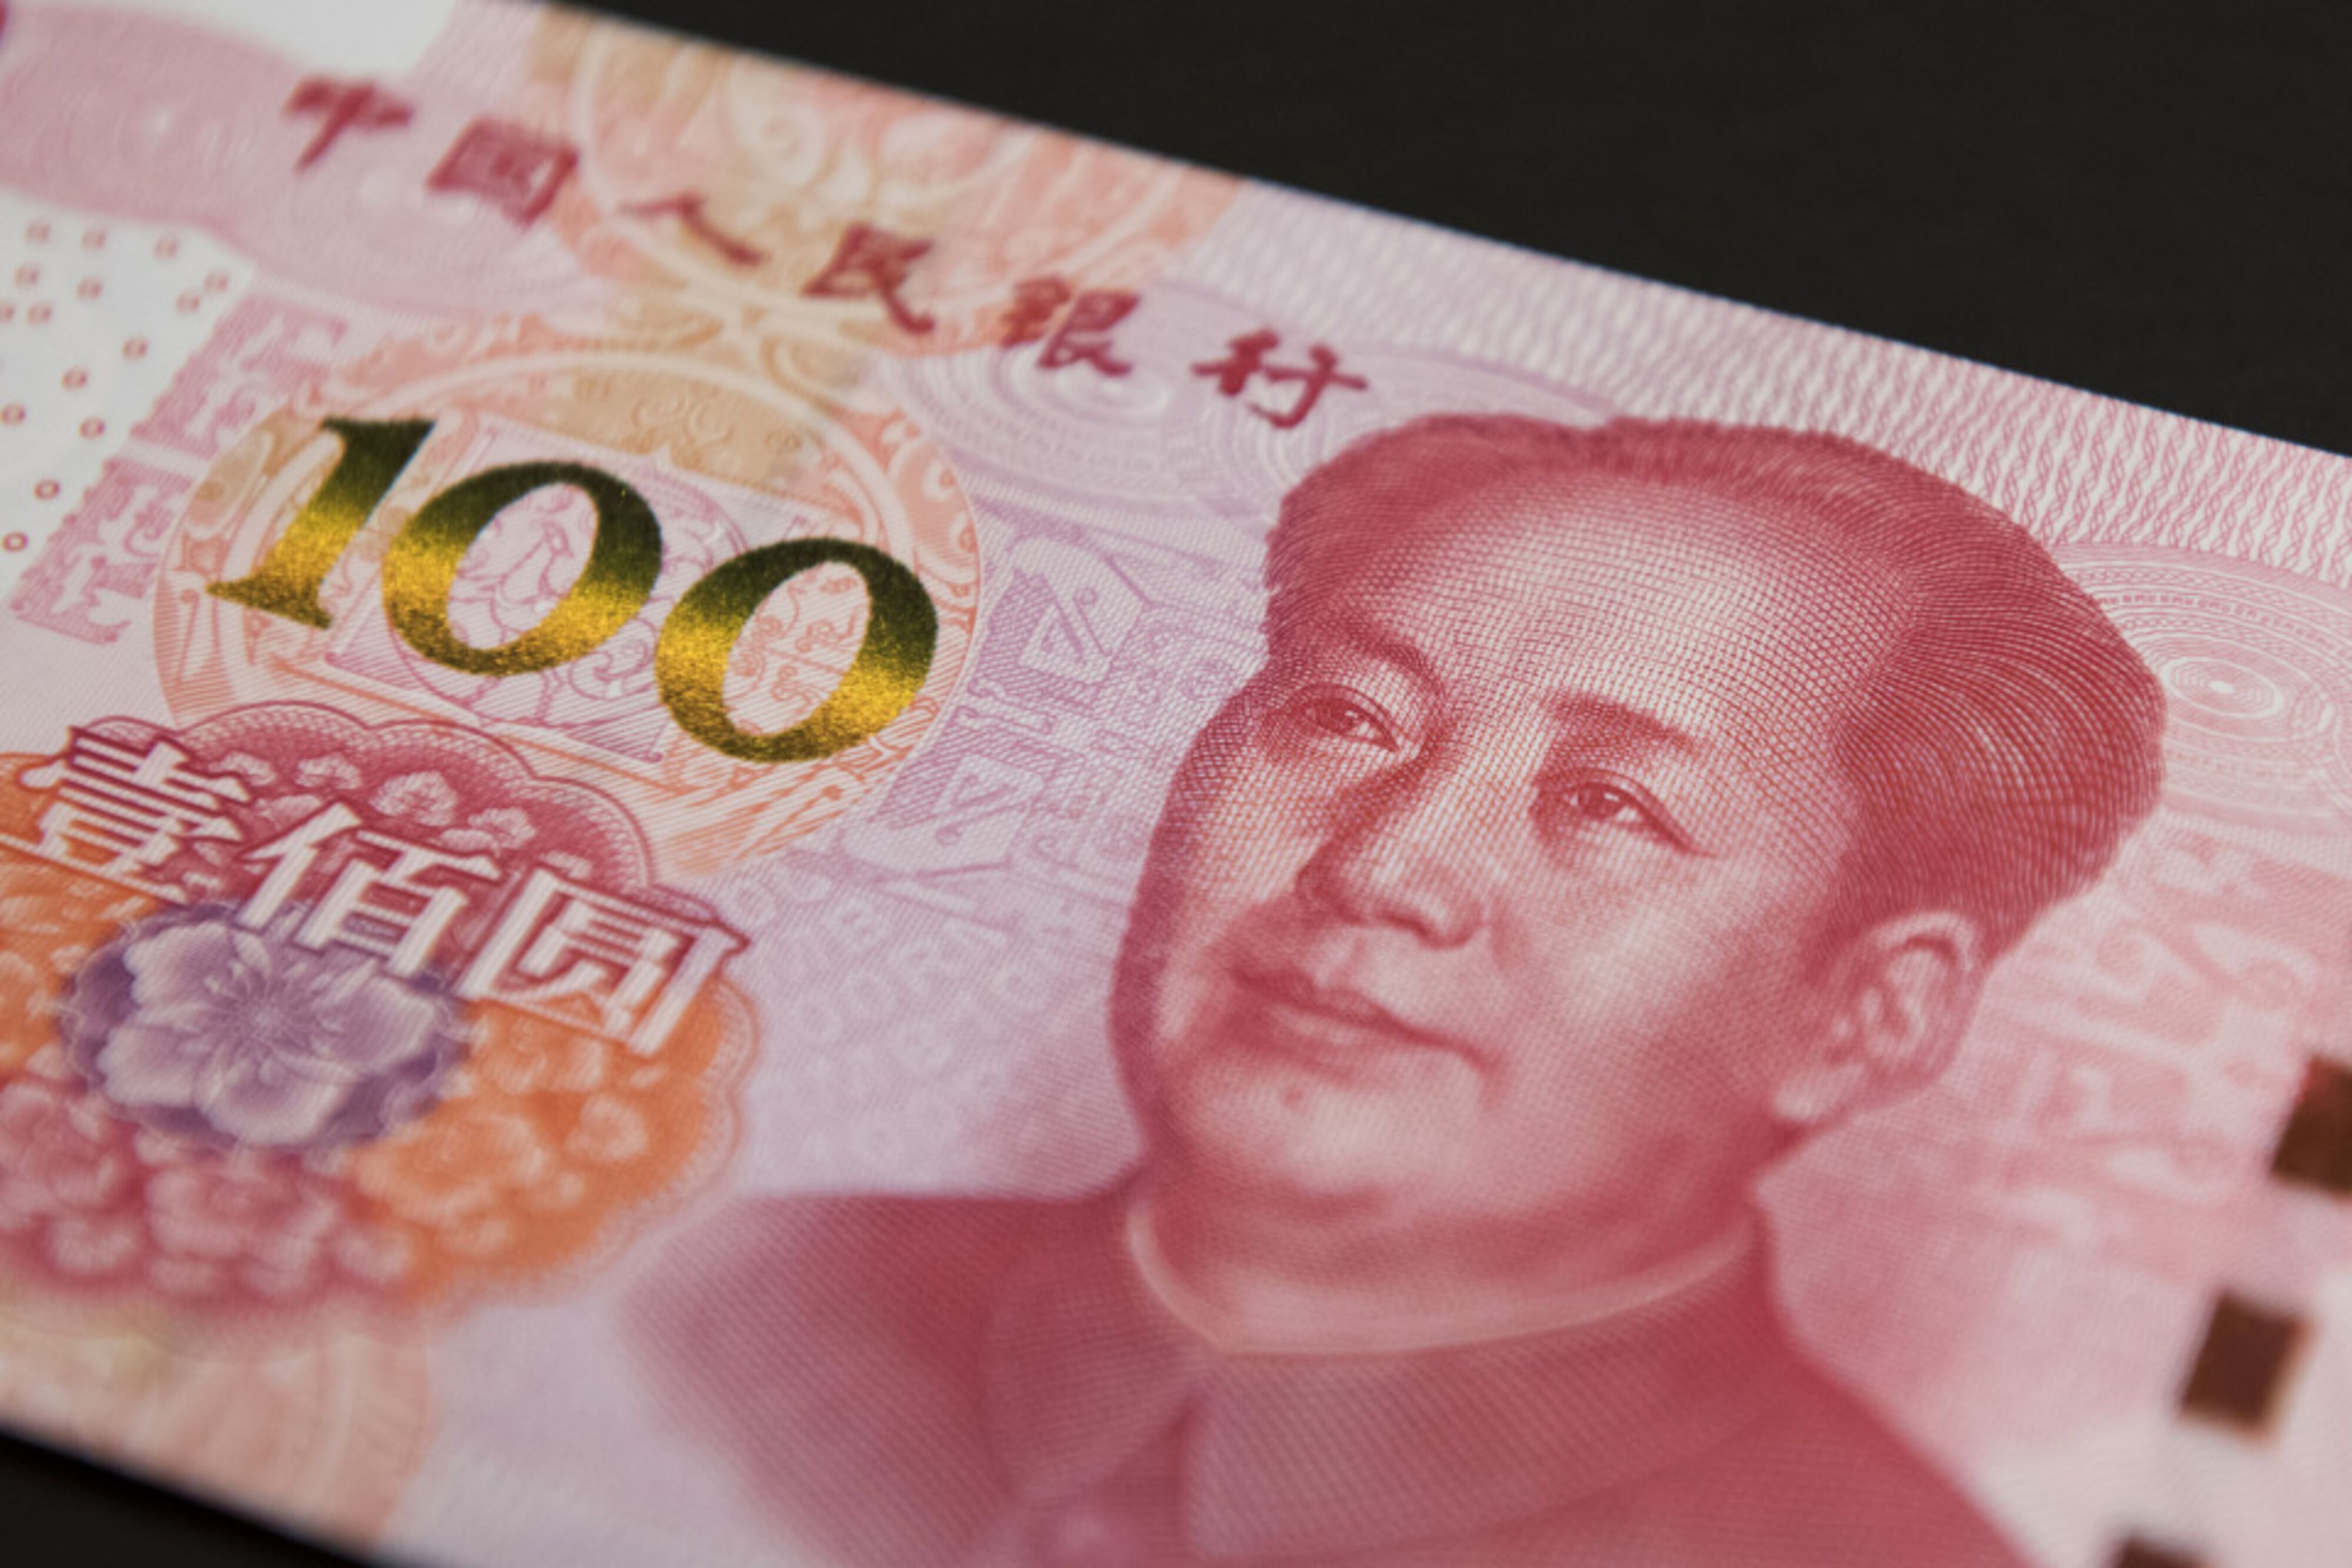 China’s central bank faces the difficult task of keeping the yuan stable while trying to both maintain supportive monetary policy for a sputtering economy and keep a lid on capital outflows. Photo: Bloomberg